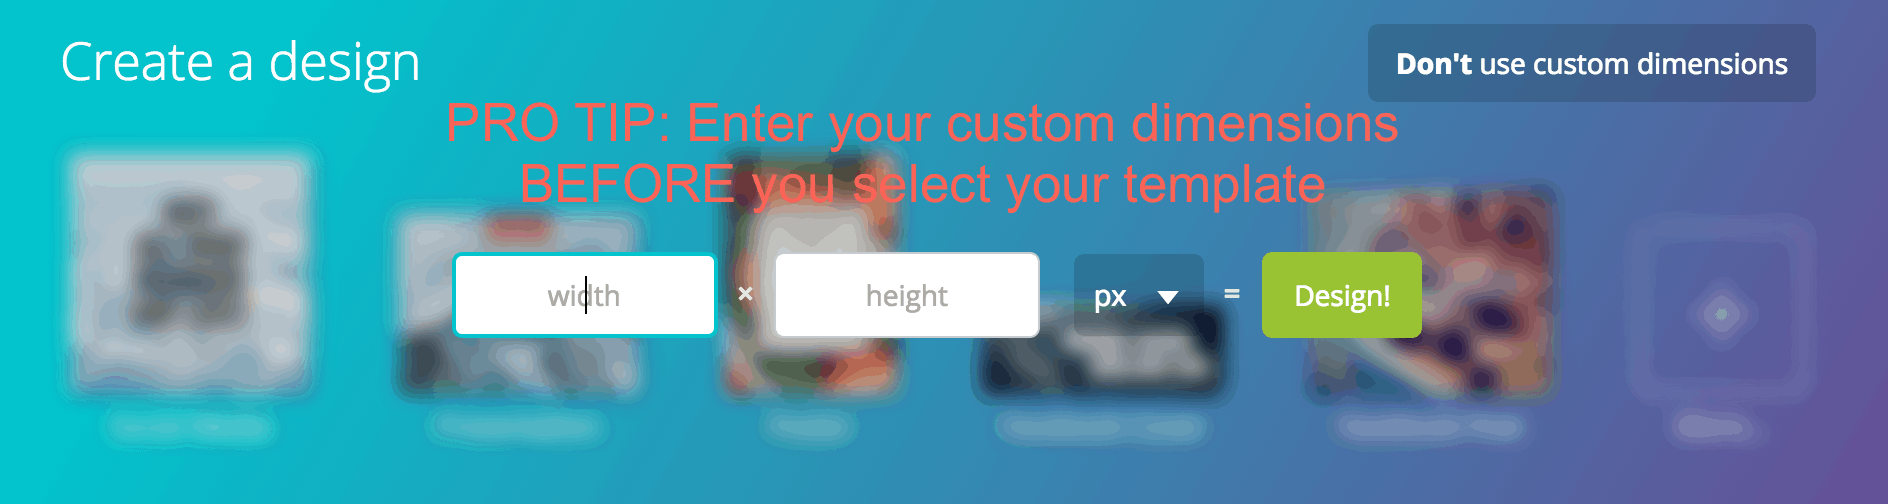 Pro Tip: Enter Custom Dimensions Using Canva deisgn tools BEFORE you select a template